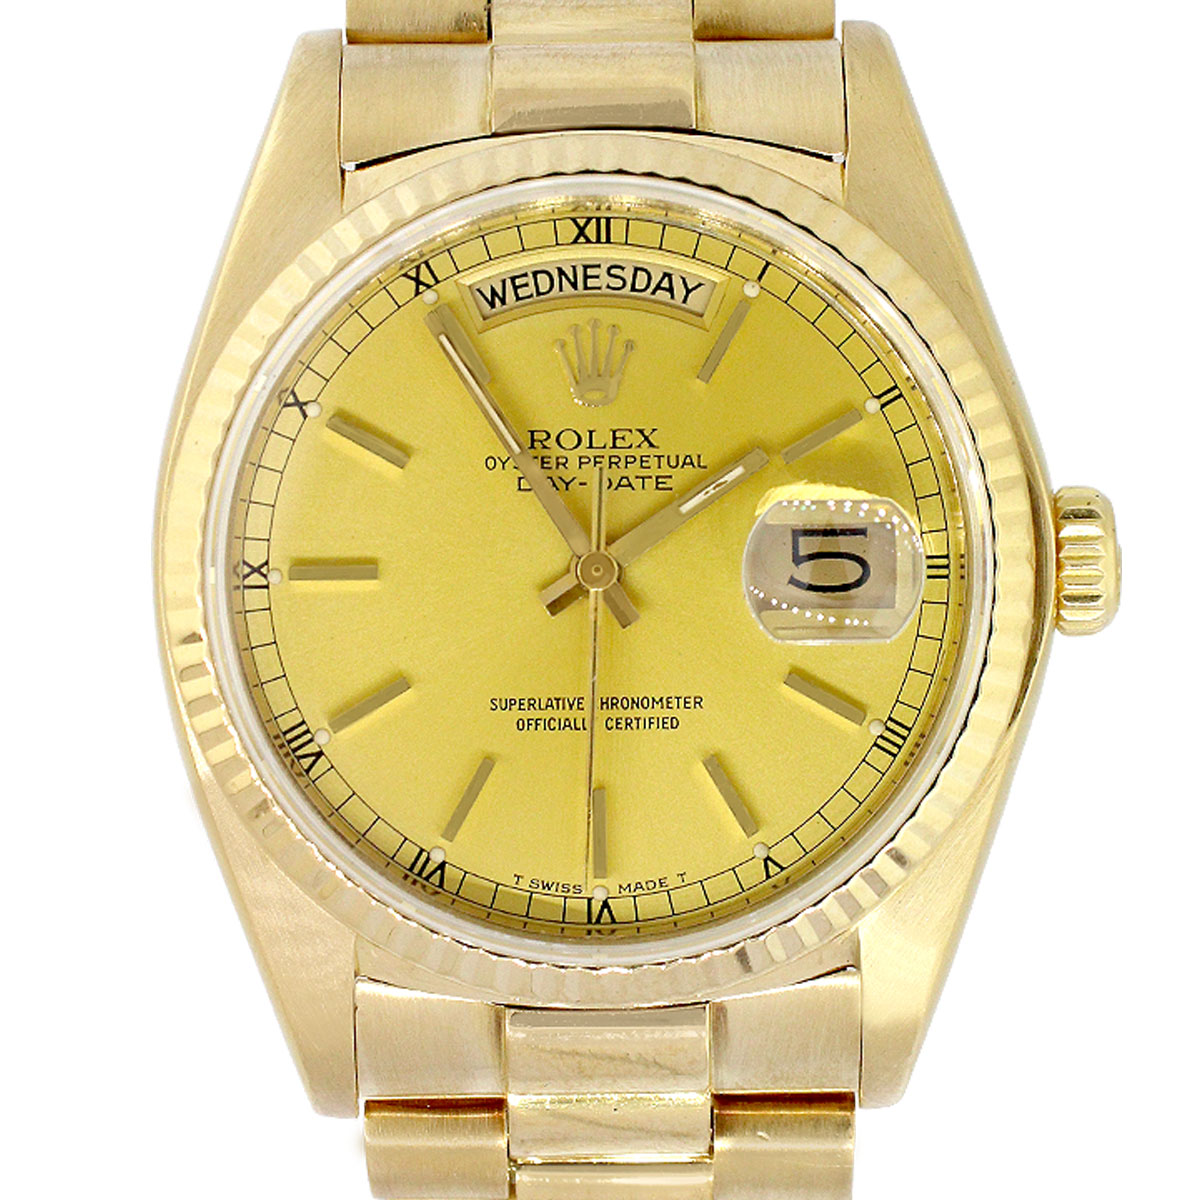 Rolex 18038 Day-Date 18k Yellow Gold Champagne Dial Watch